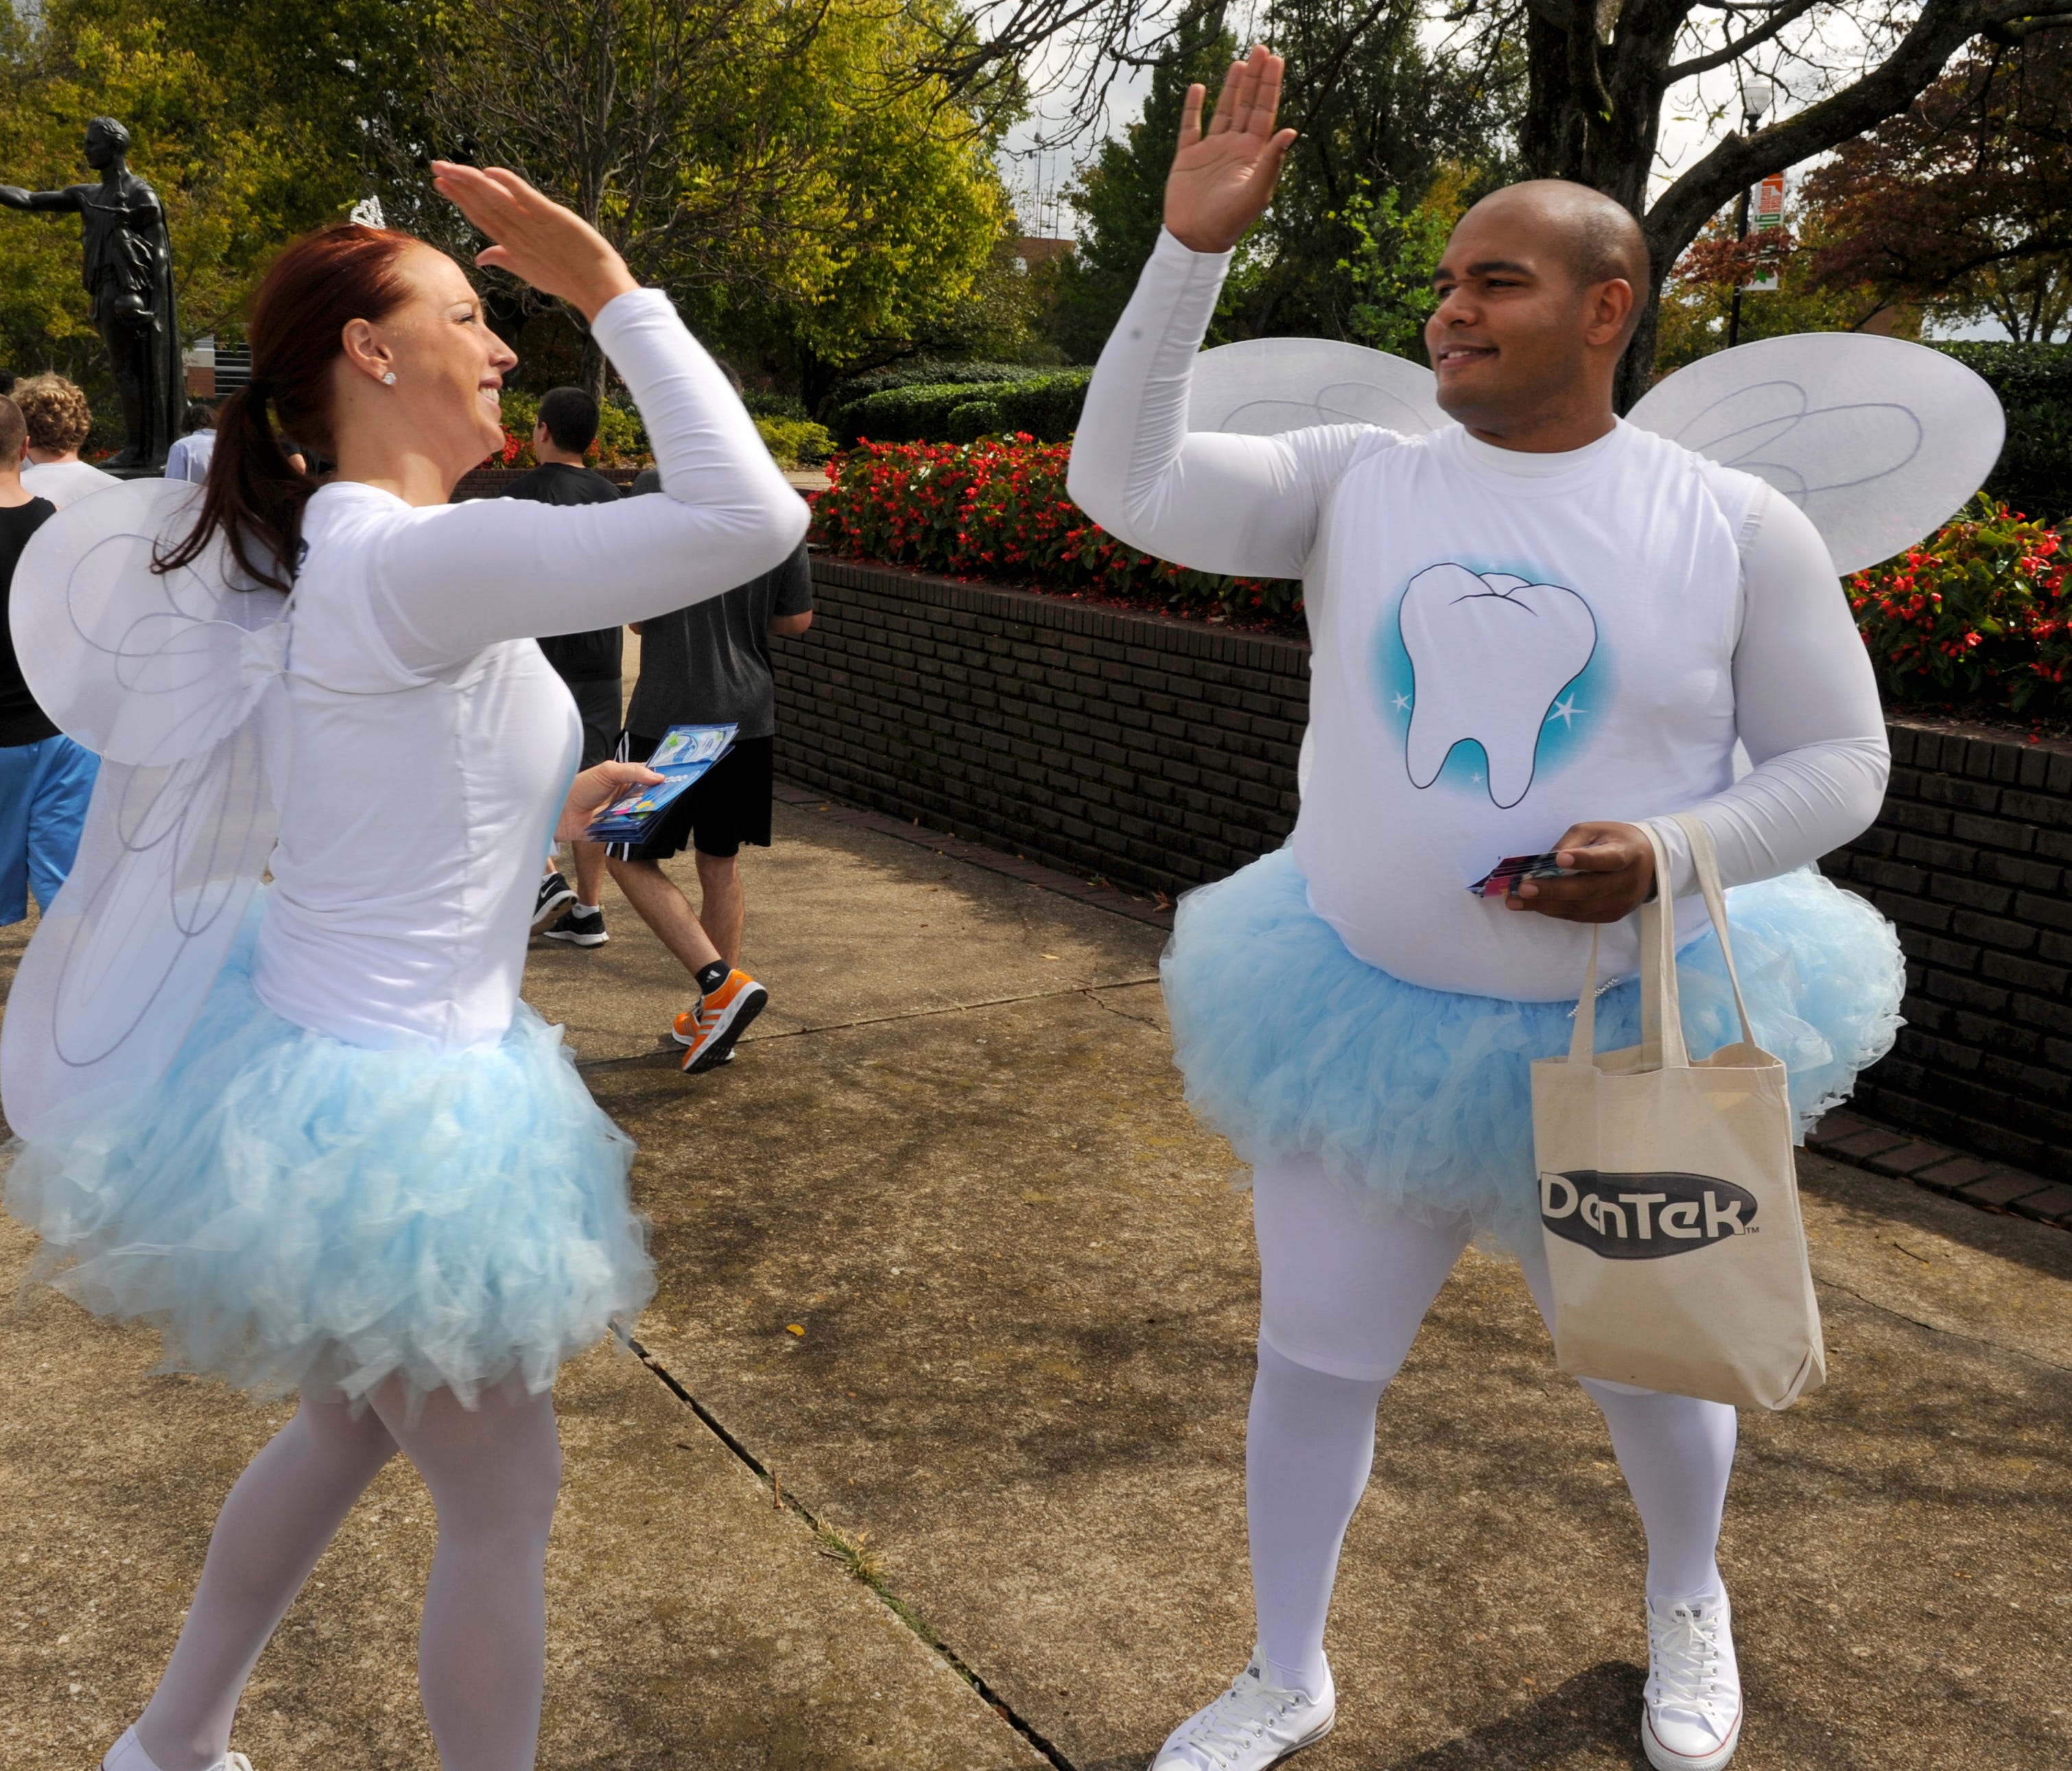 The Tooth Fairy is on a tighter budget this year, on average leaving 24 cents less per tooth than last year, according to a Visa survey out Monday. Tooth fairies Jessica Mitchell, left, and Jamie Vaughn exchange a high-five after handing out dental f